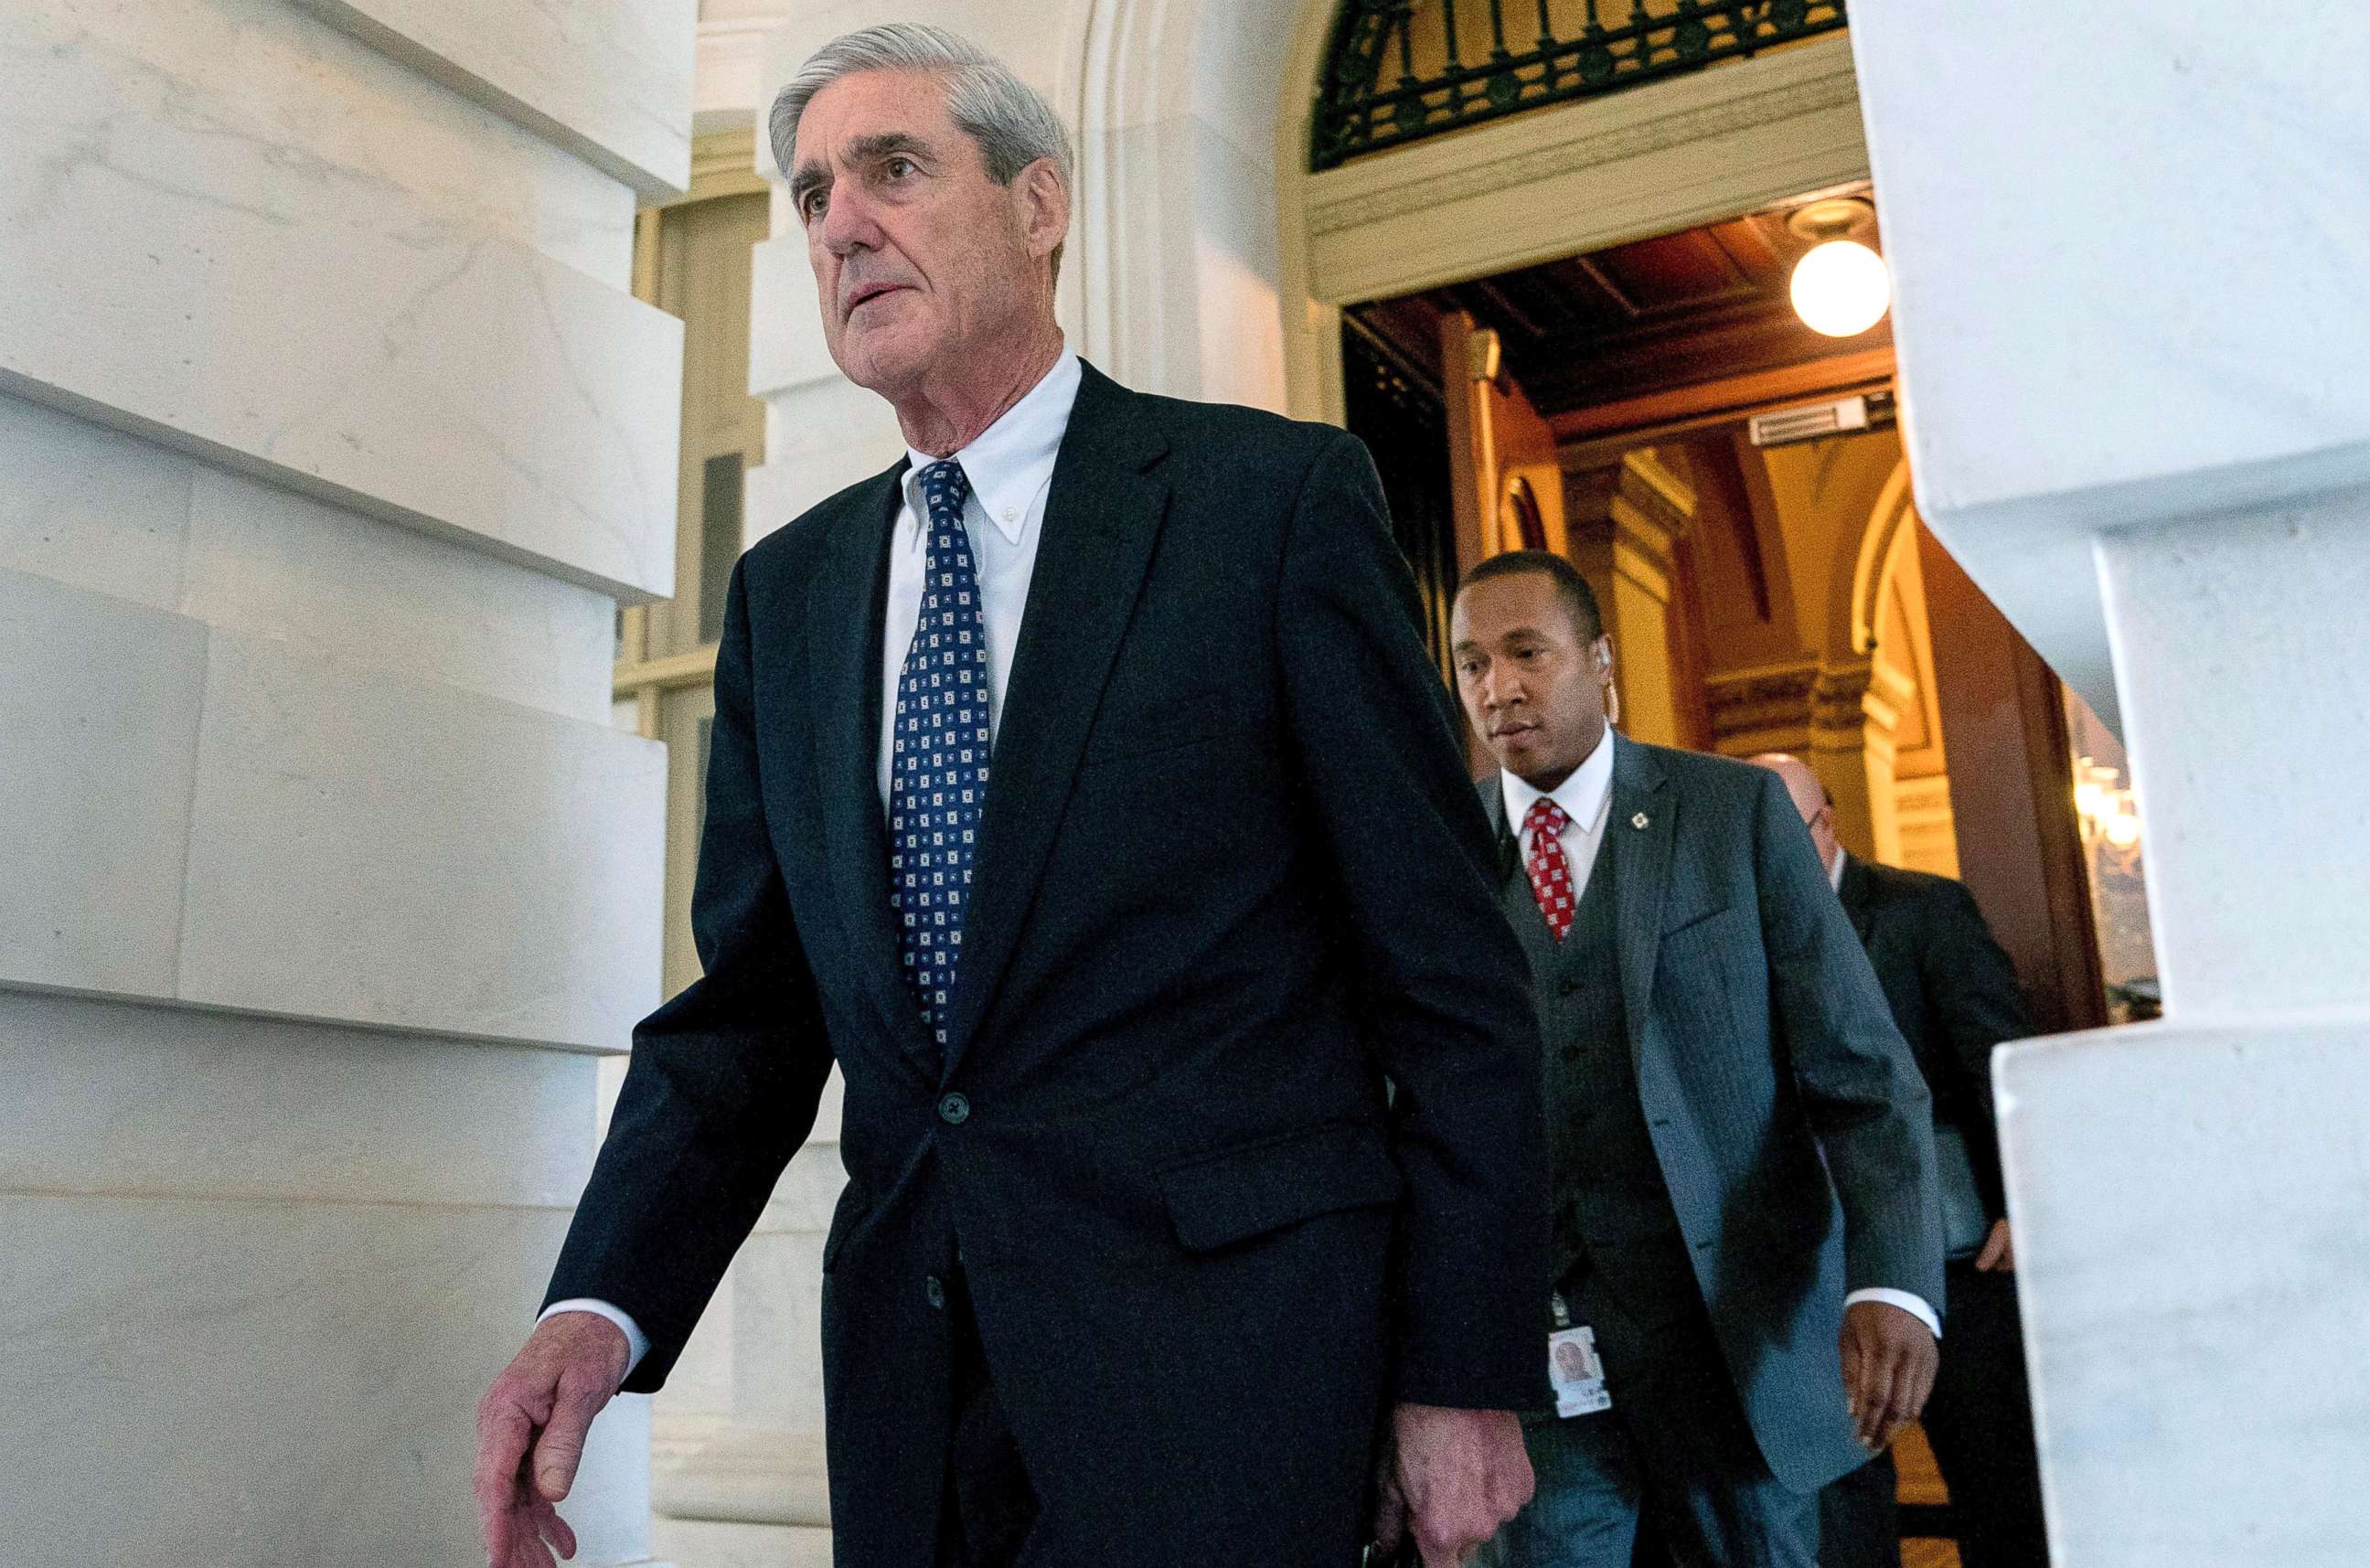 PHOTO: Robert Mueller, the special counsel probing Russian interference in the 2016 election, departs Capitol Hill, June 21, 2017.